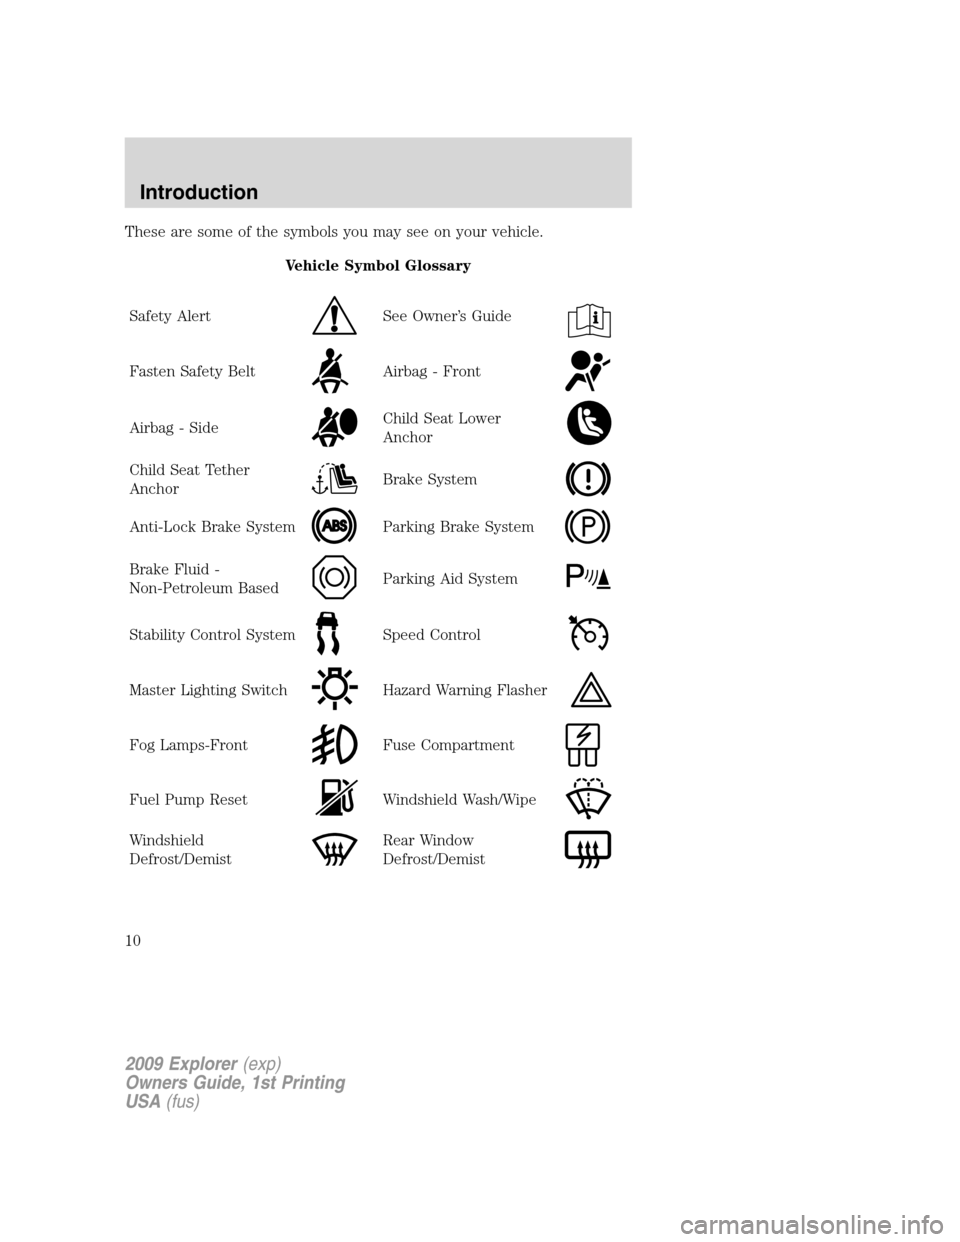 FORD EXPLORER 2009 4.G Owners Manual These are some of the symbols you may see on your vehicle.
Vehicle Symbol Glossary
Safety Alert
See Owner’s Guide
Fasten Safety BeltAirbag - Front
Airbag - SideChild Seat Lower
Anchor
Child Seat Tet